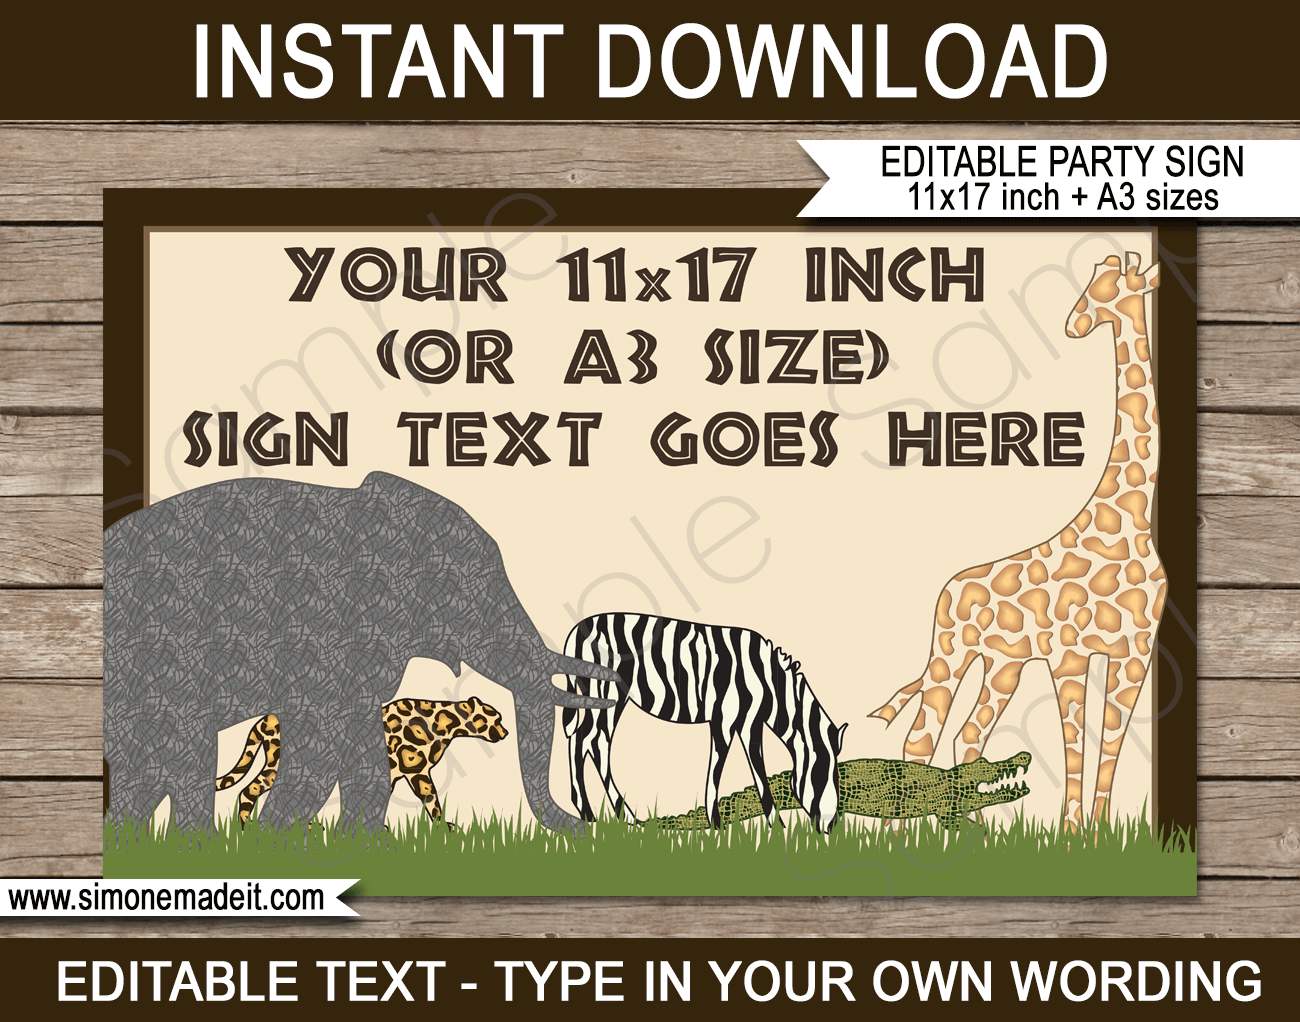 Printable Animal Safari Party Sign Template | 11x17 inch, A3 | Editable Text | Jungle or Zoo Theme Birthday Party Decorations | $4.00 Instant Download via SIMONEmadeit.com